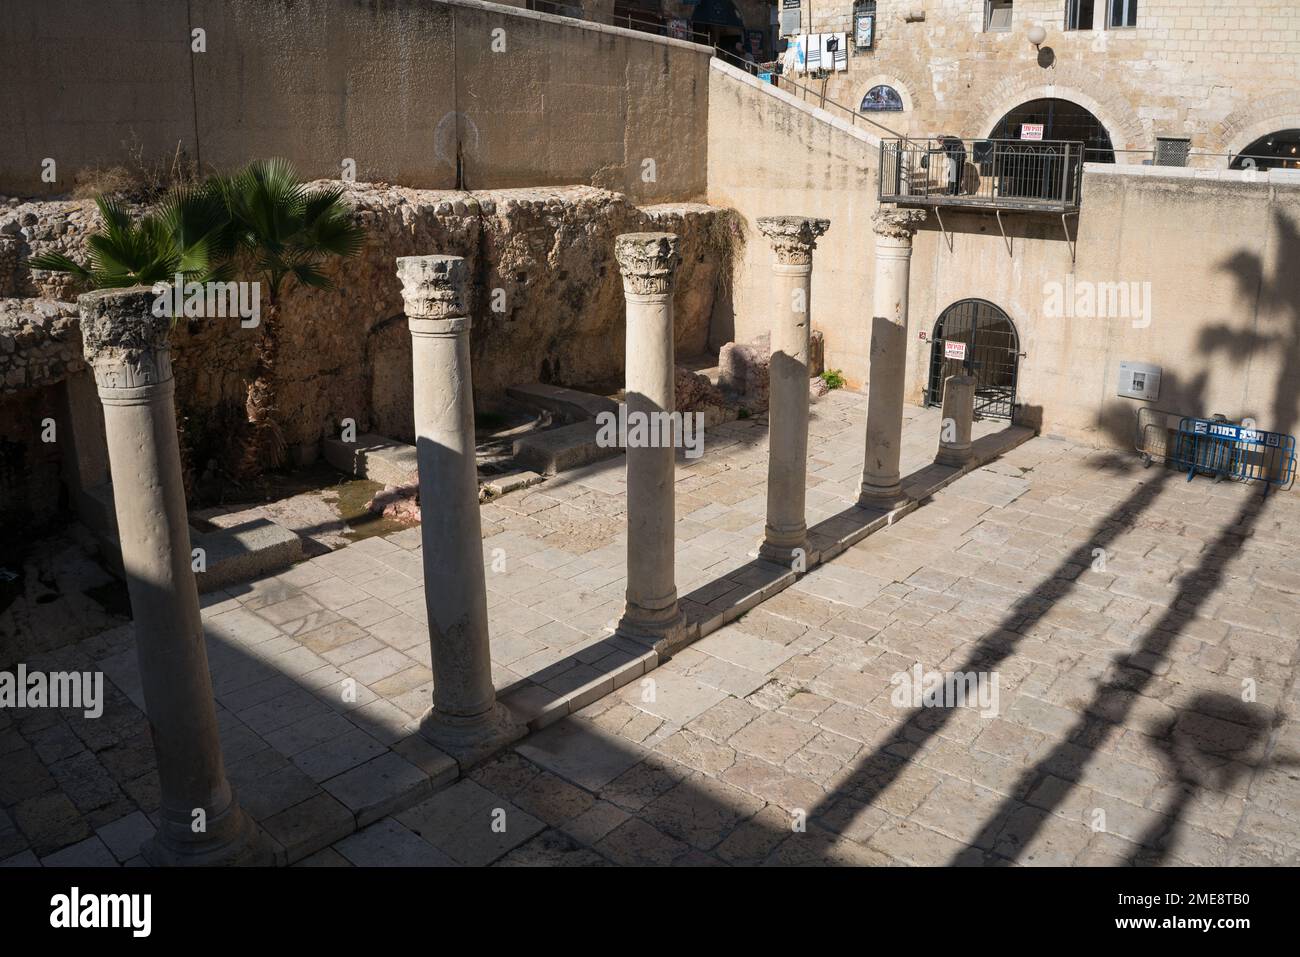 General view of the Cardo, ruins of the Ancient Roman Street, Jerusalem, Israel, Asia. Stock Photo